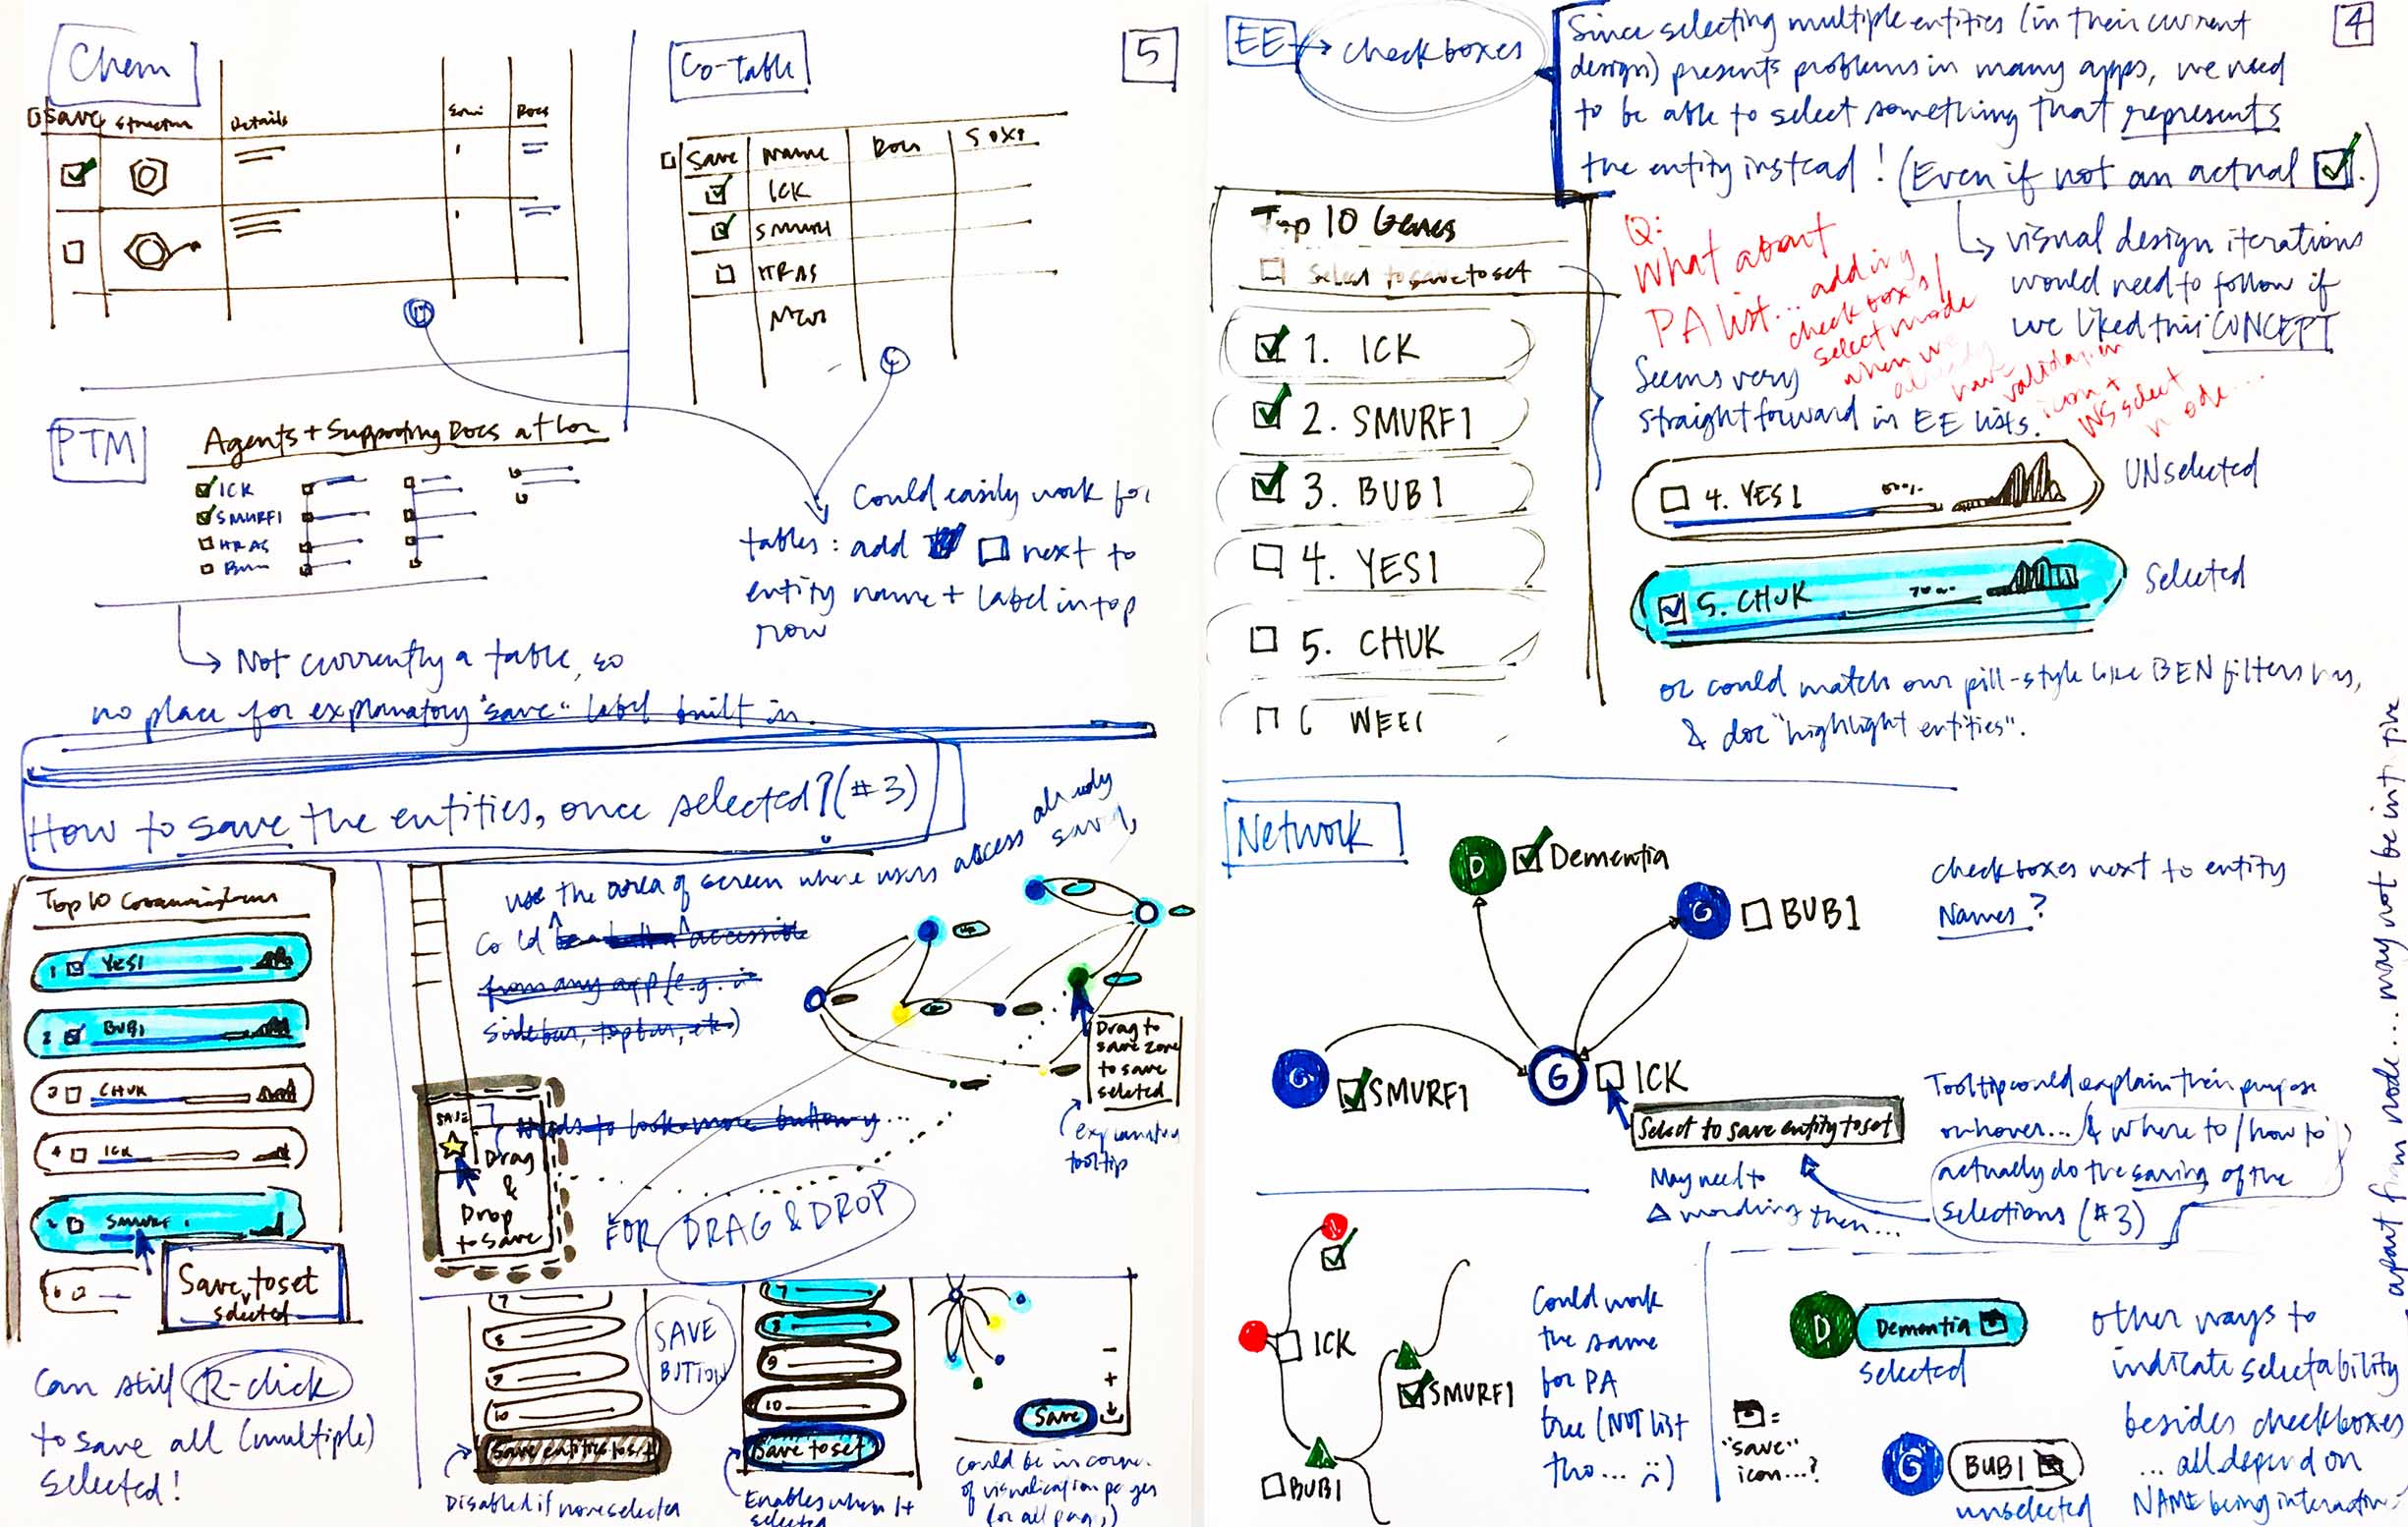 A couple pages from my stack of sketches, showcasing exuberantly drawn UI elements and arrows connecting ideas.